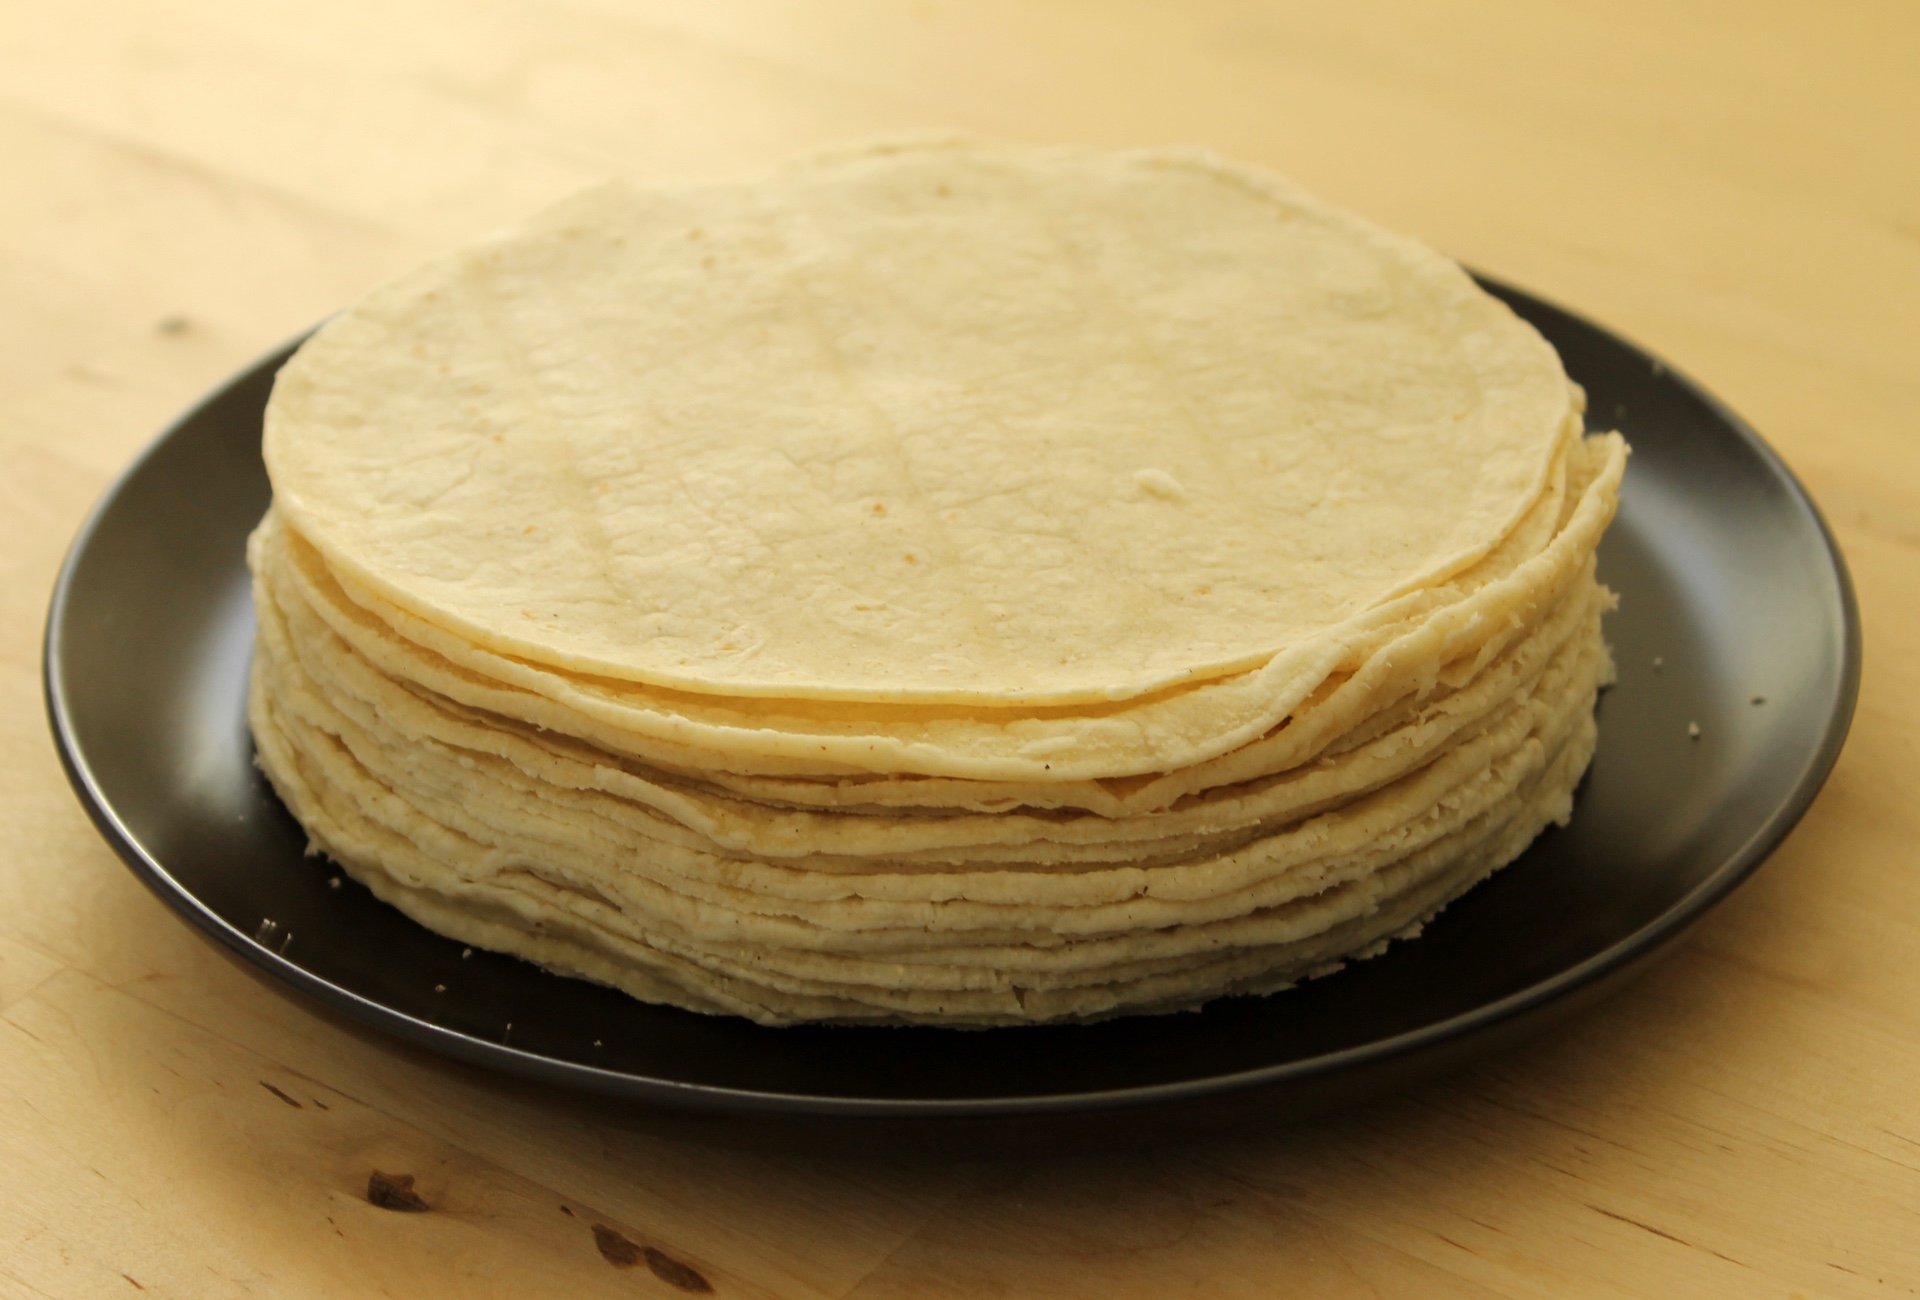 Mi Pueblo’s tortillas are made in house and sold hot.